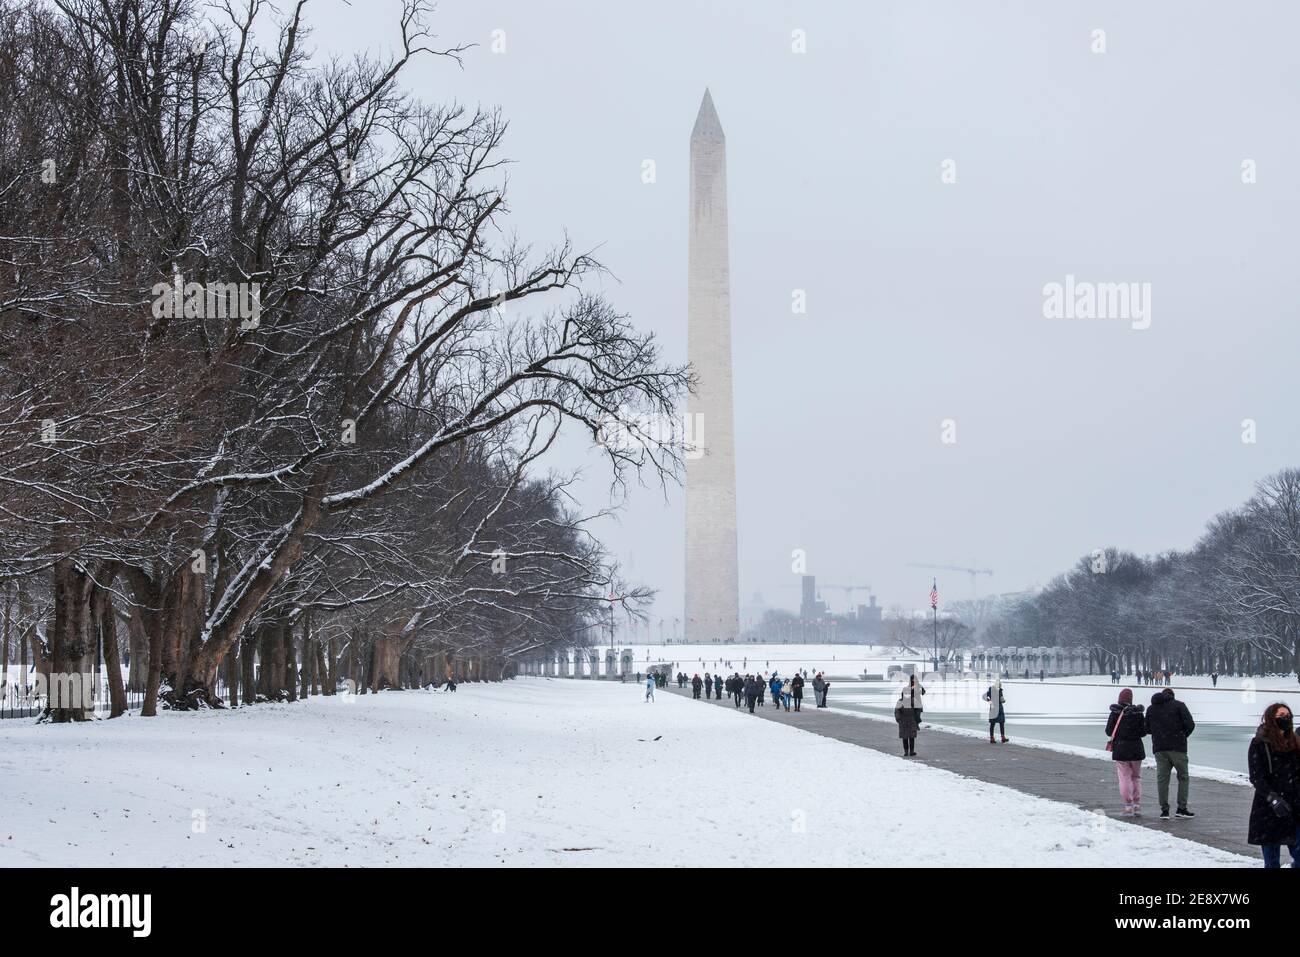 Snow falls on the National Mall in Washington, D.C. Stock Photo